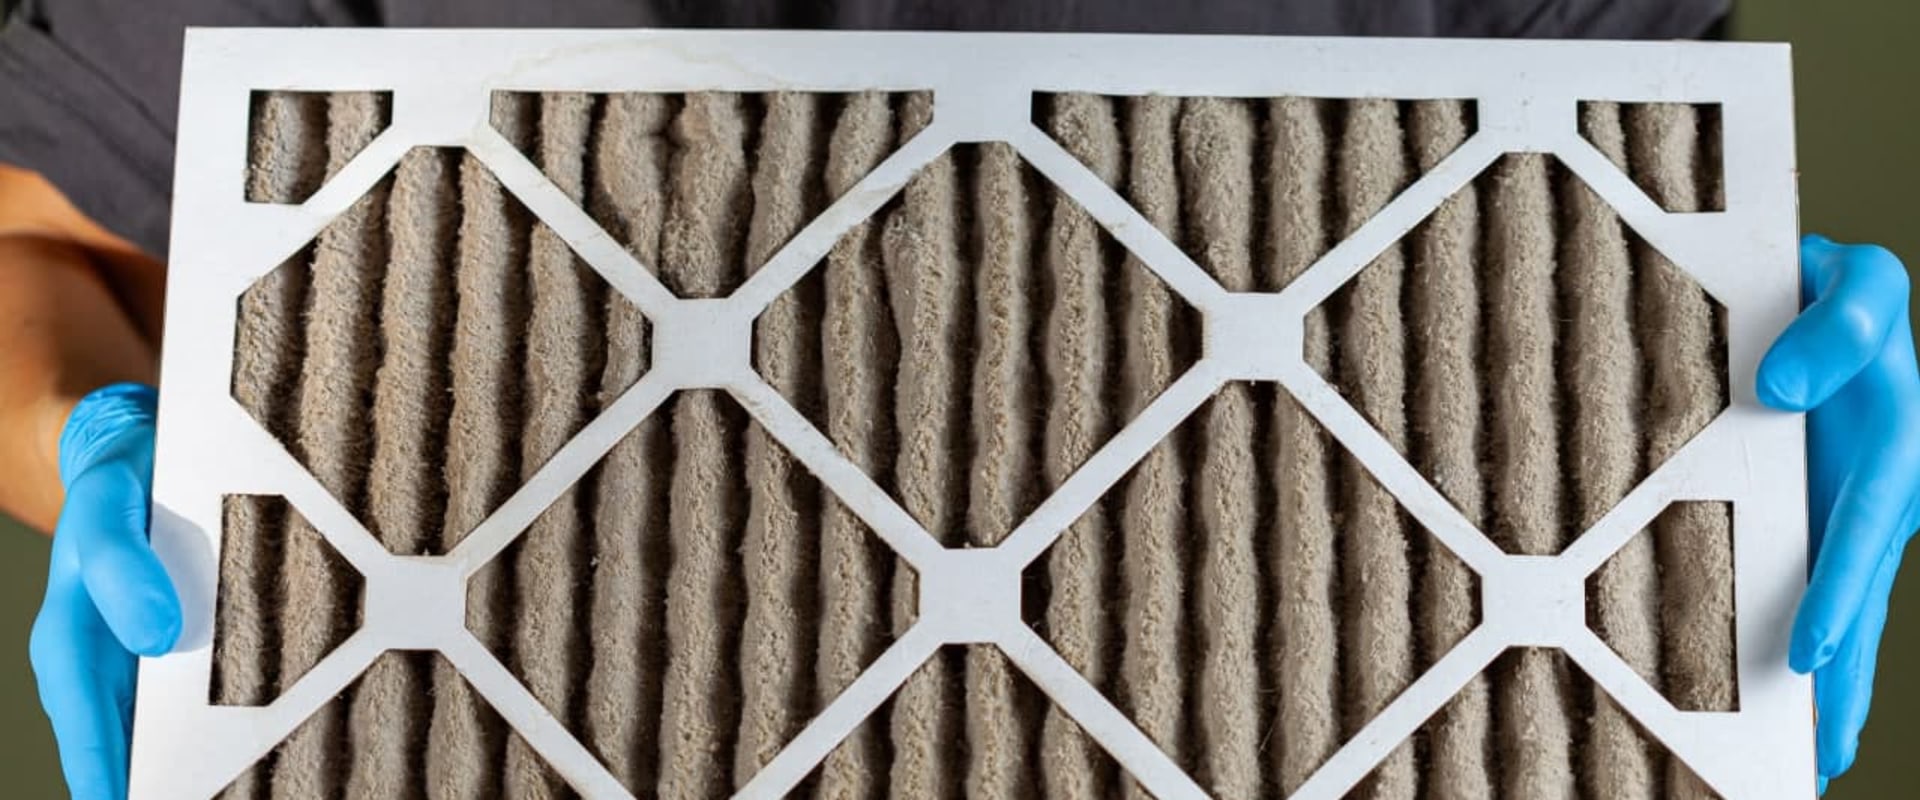 Can I Replace a 4-Inch Furnace Filter with a 1-Inch Filter?